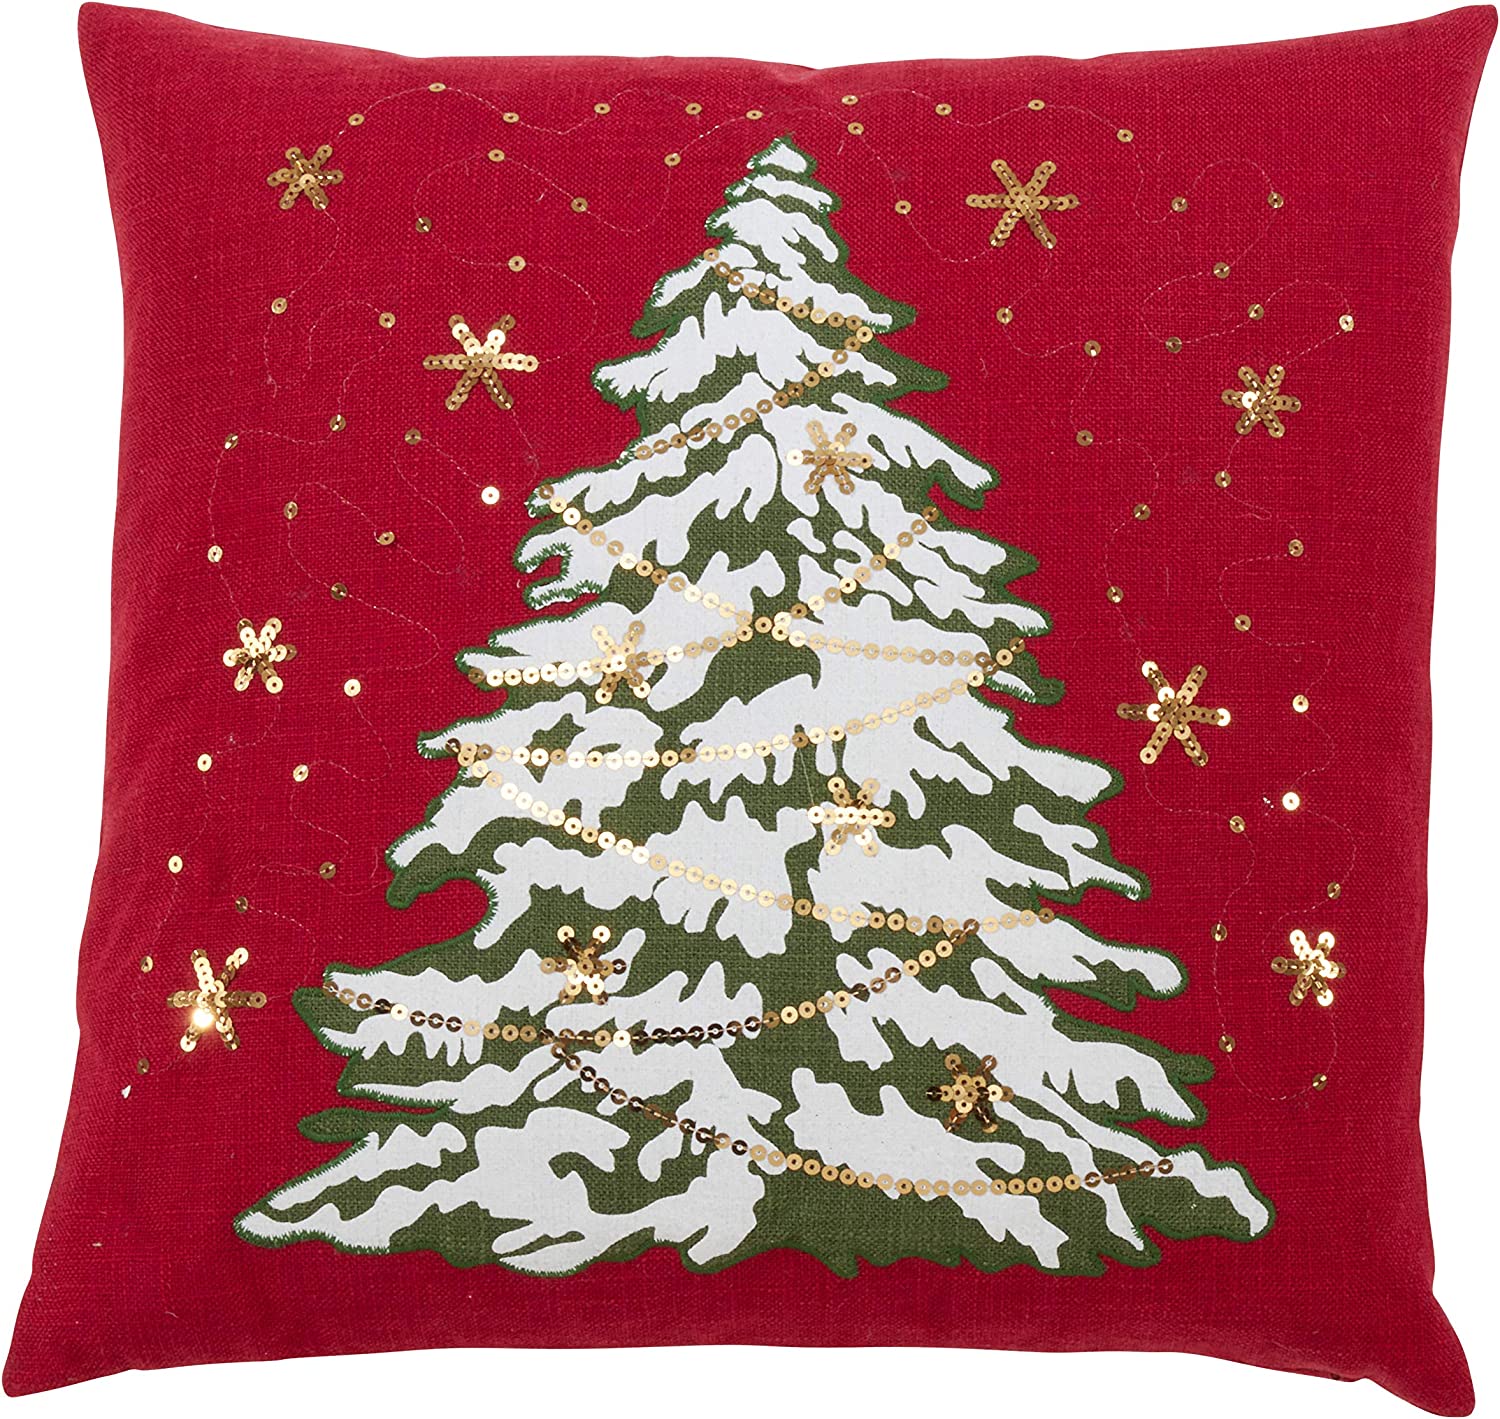 Red Christmas Tree Pillow with LED Lights